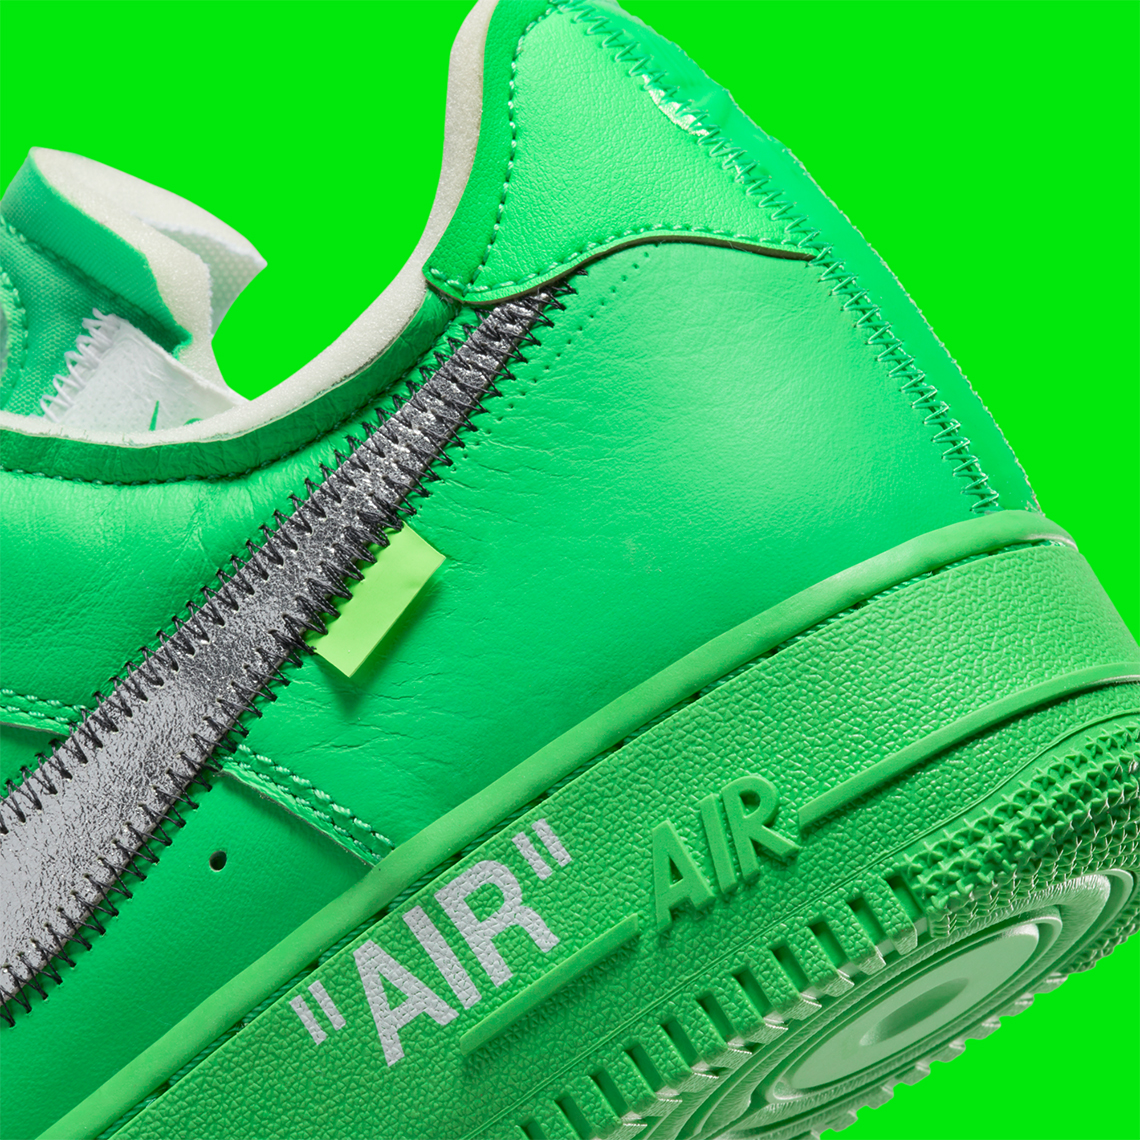 Off-White Nike Air Force 1 Green DX1419-300 | SneakerNews.com